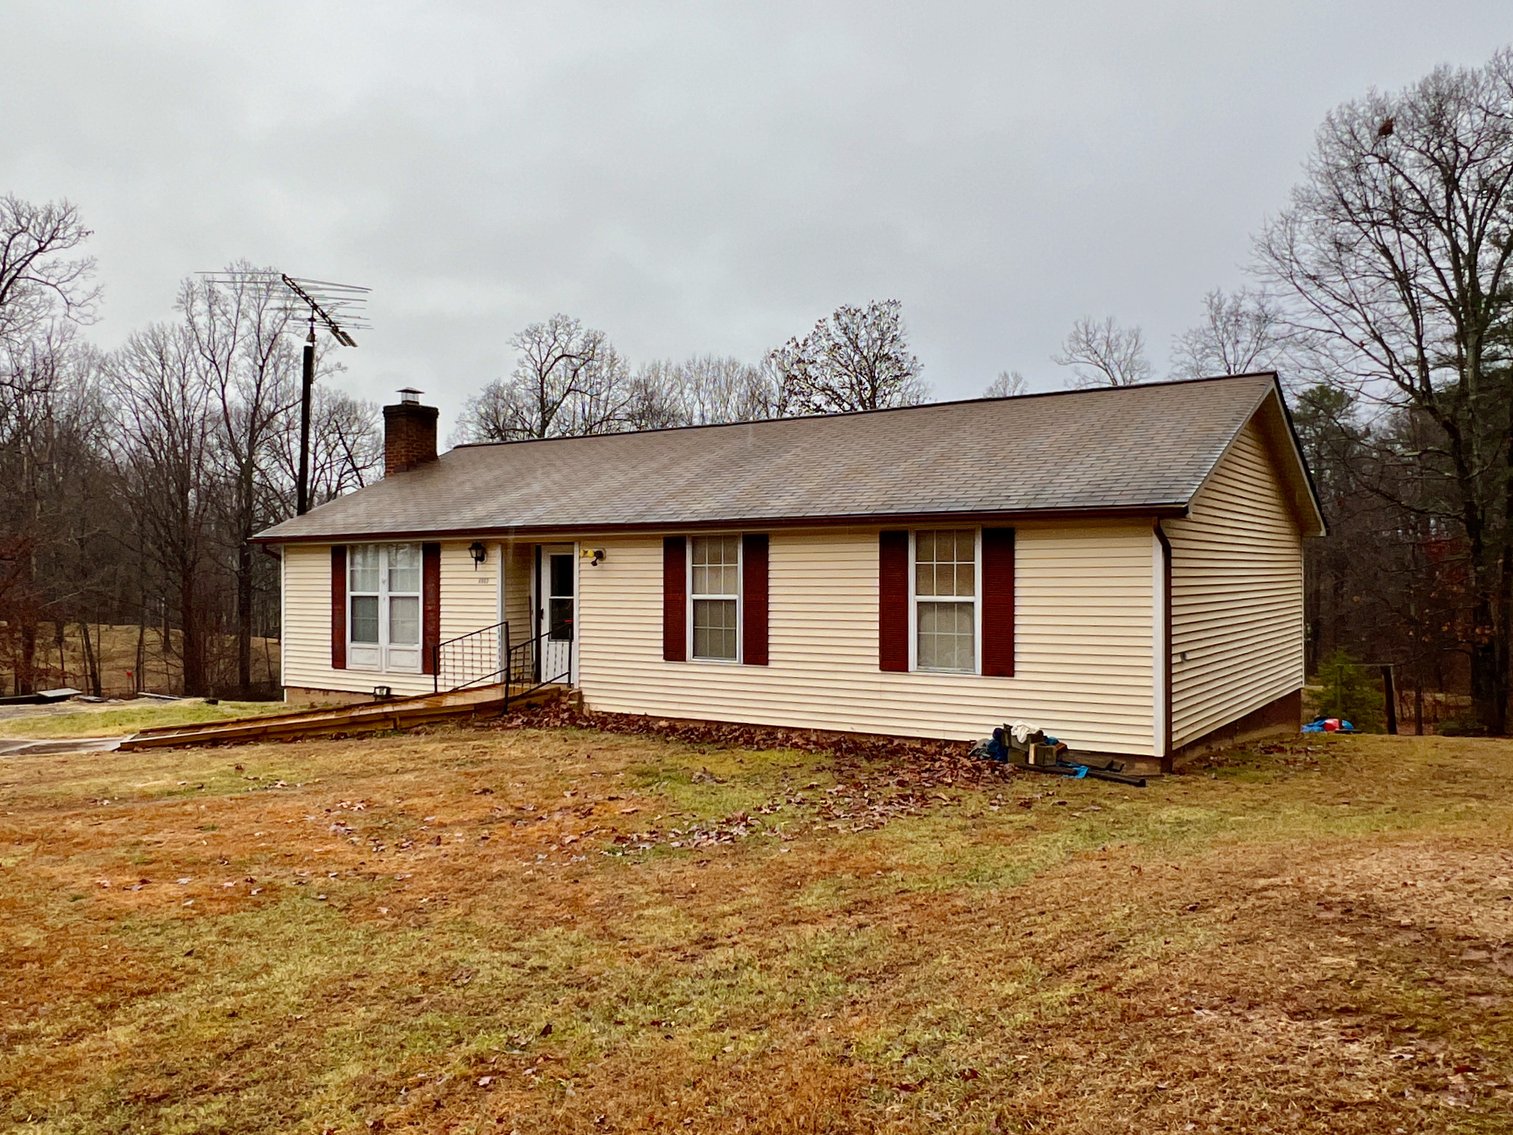 Image for 3 BR/2 BA Home w/Basement & Multiple Outbuildings on 5.2 +/- Acres in Madison County, VA--SELLING to the HIGHEST BIDDER!!